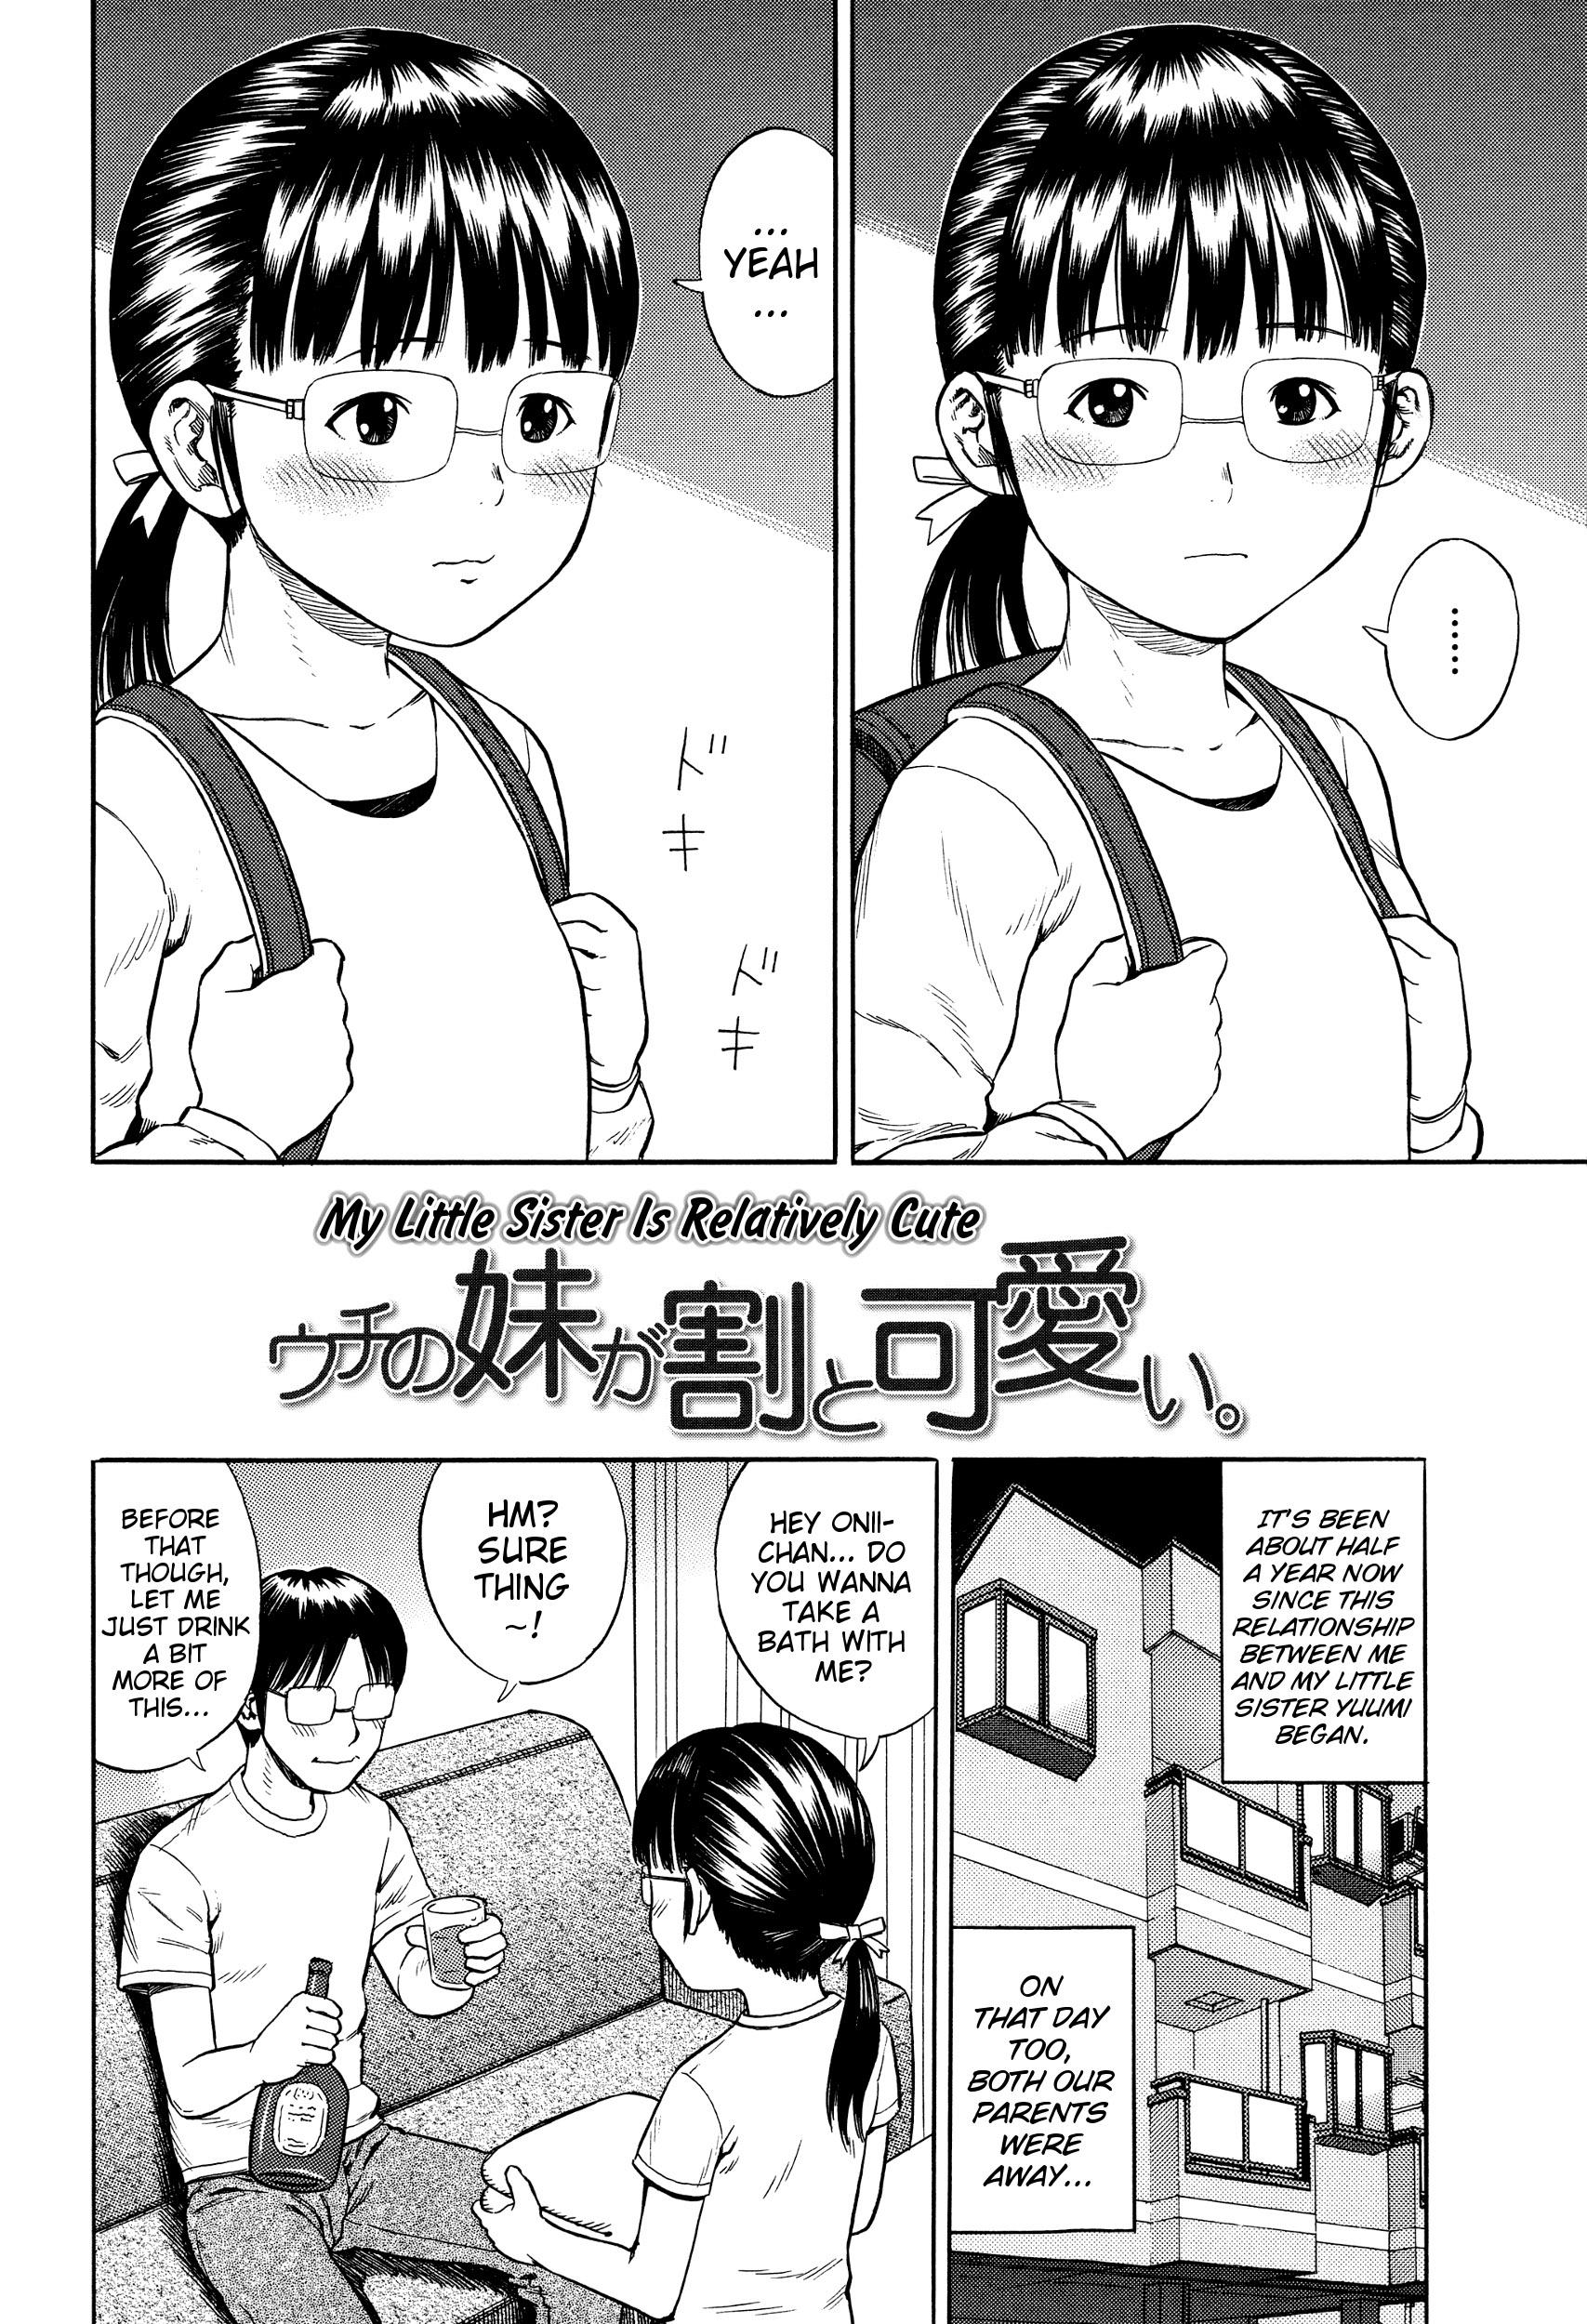 Phat Ass Uchi no Imouto ga Warito Kawaii | My Little Sister Is Relatively Cute Doggy Style - Page 2